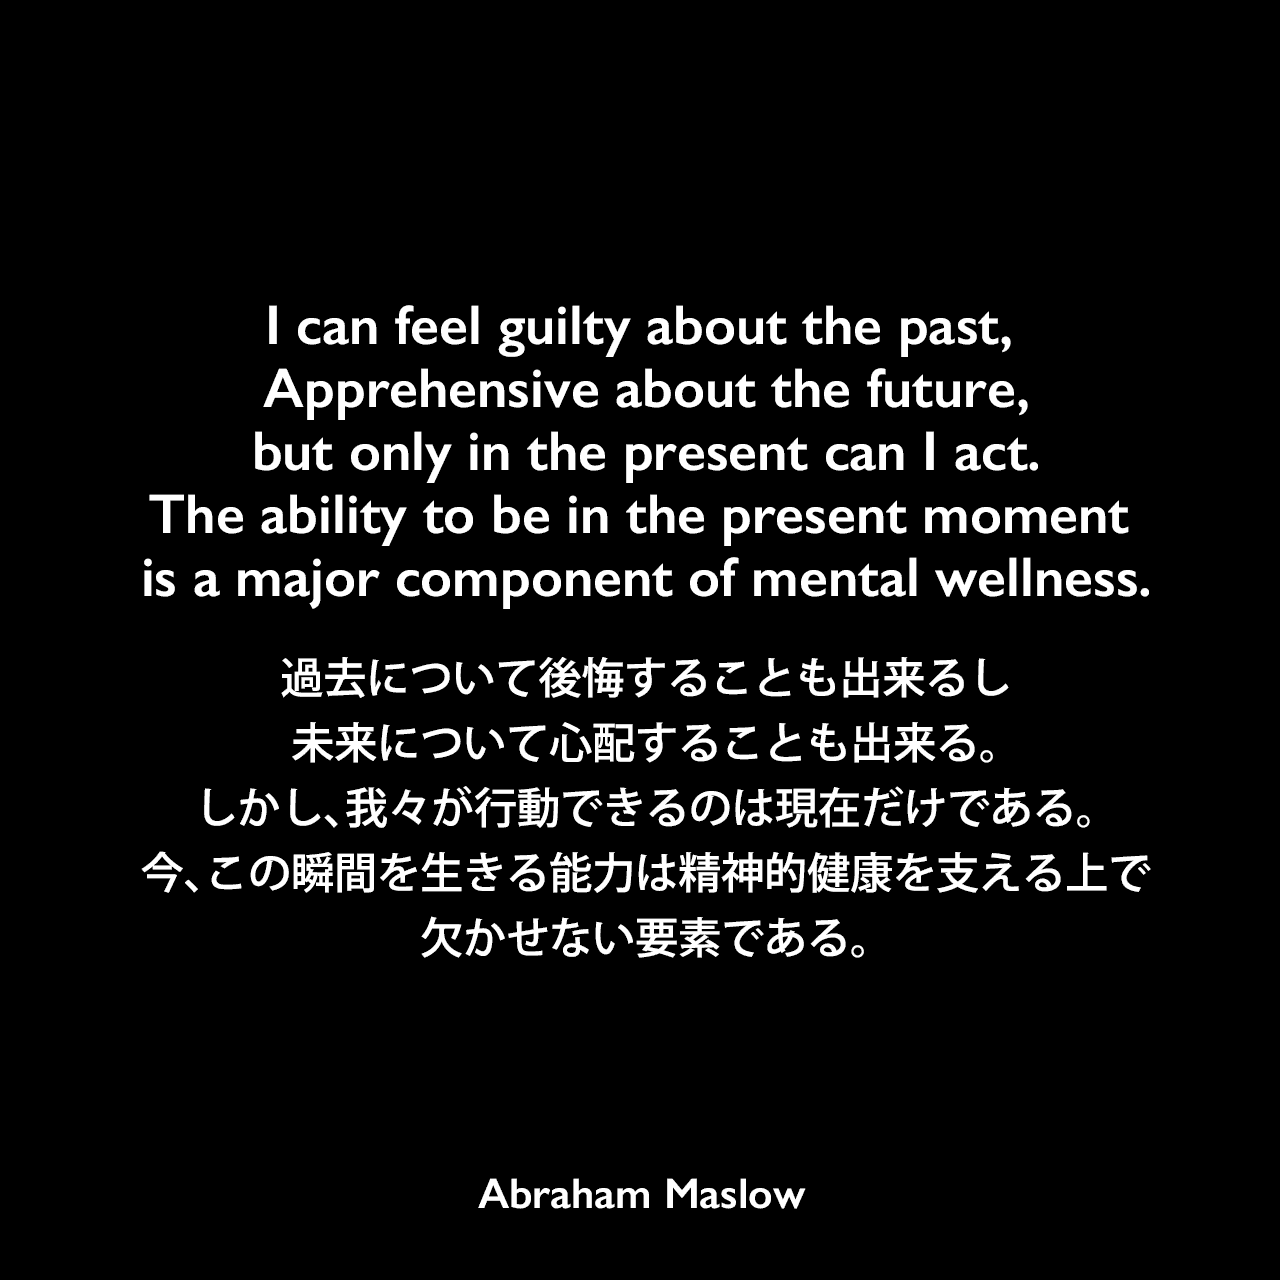 I can feel guilty about the past, Apprehensive about the future,but only in the present can I act.The ability to be in the present moment is a major component of mental wellness.過去について後悔することも出来るし未来について心配することも出来る。しかし、我々が行動できるのは現在だけである。今、この瞬間を生きる能力は精神的健康を支える上で欠かせない要素である。Abraham Maslow